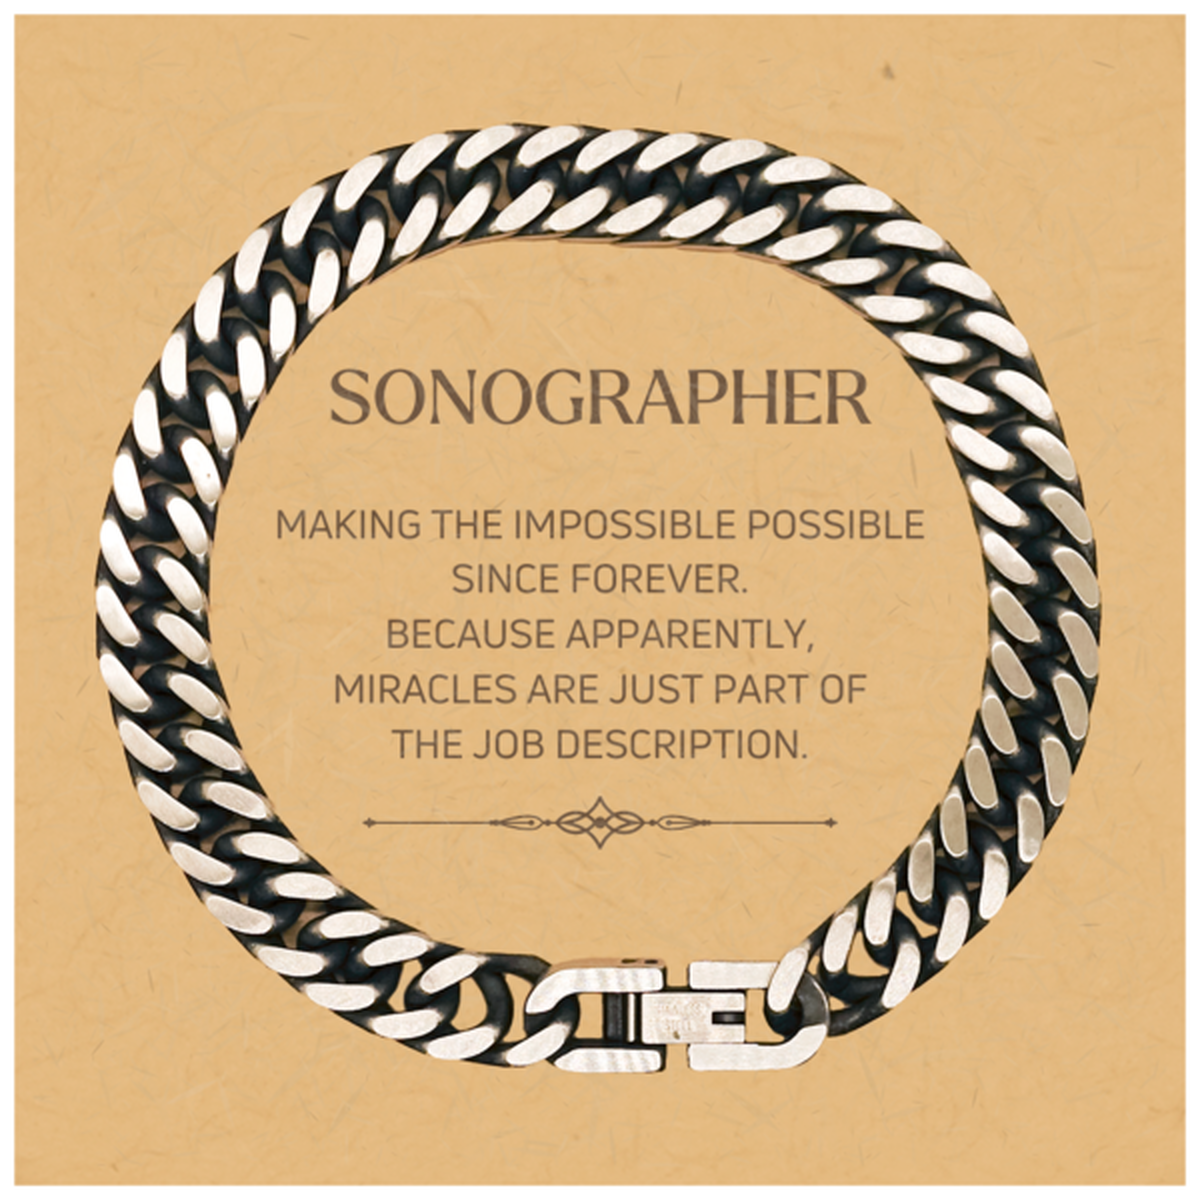 Funny Sonographer Gifts, Miracles are just part of the job description, Inspirational Birthday Christmas Cuban Link Chain Bracelet For Sonographer, Men, Women, Coworkers, Friends, Boss